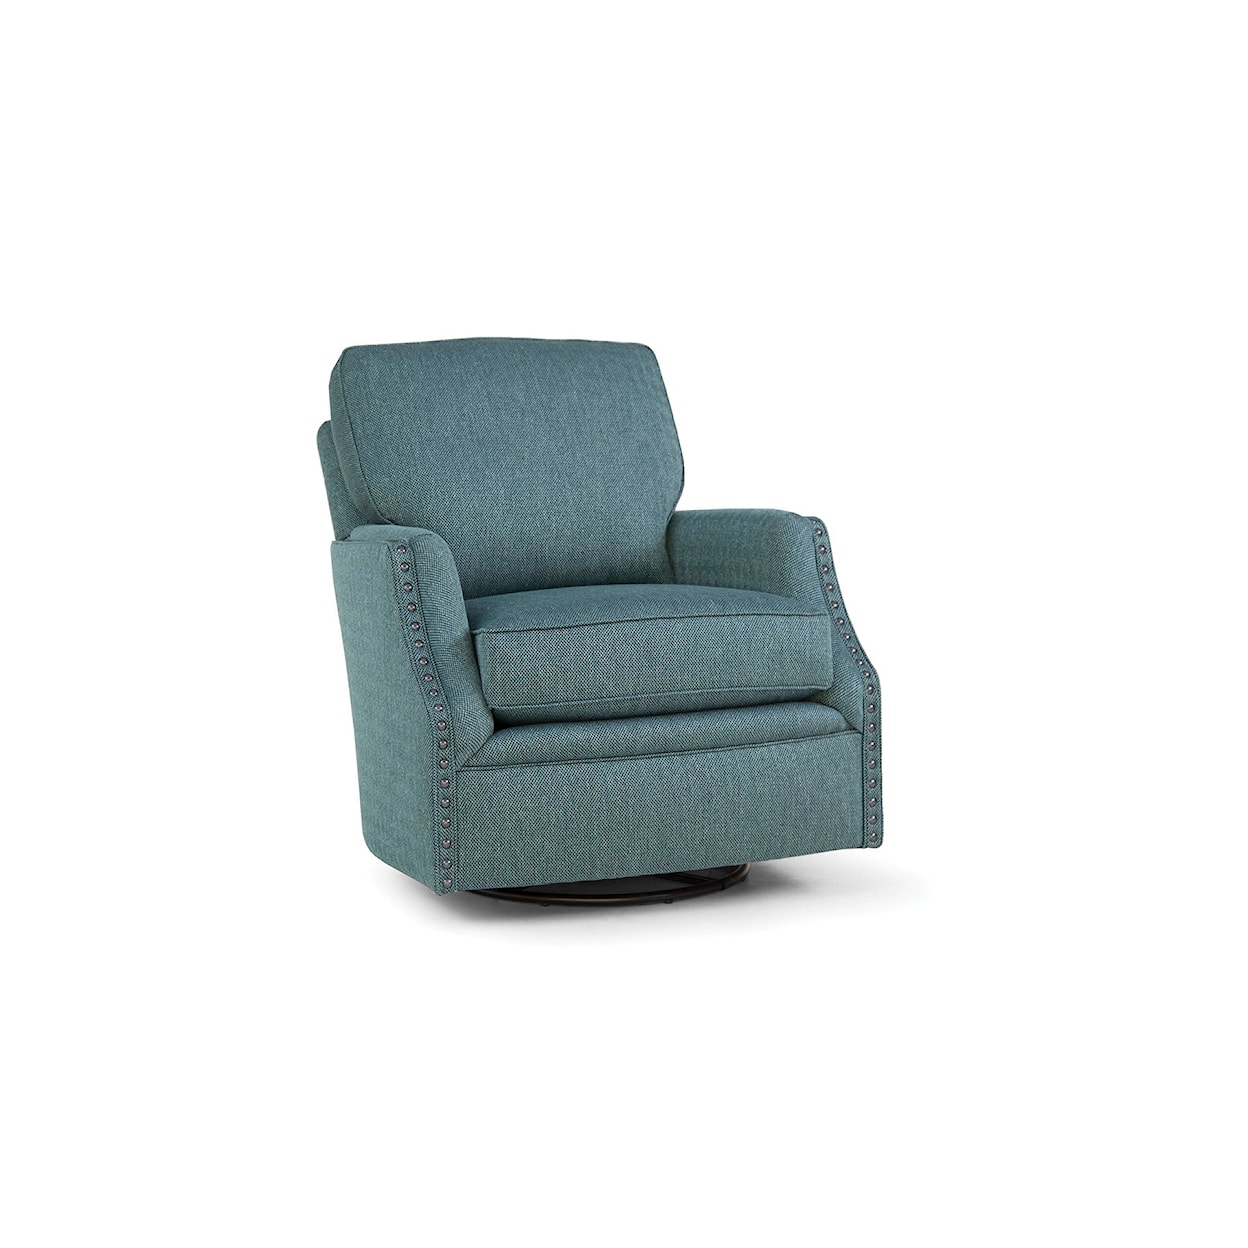 Smith Brothers Smith Brothers Swivel Glider Chair